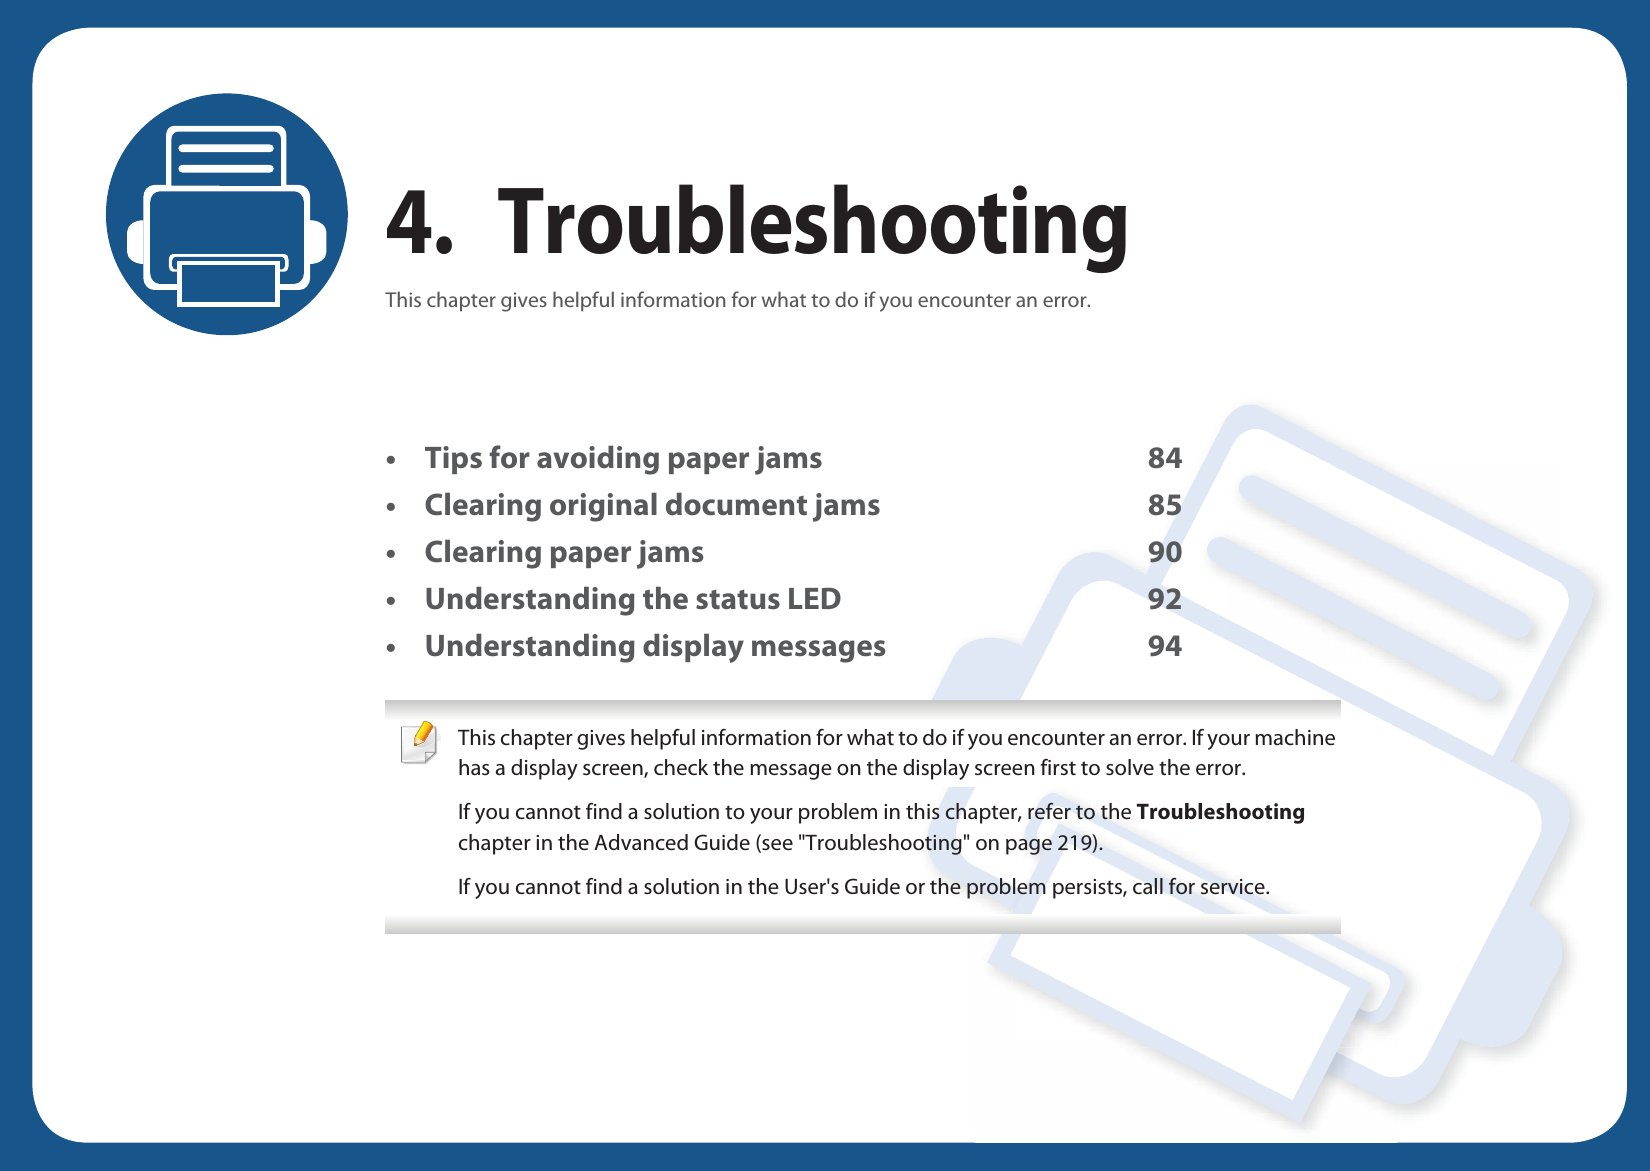 4. TroubleshootingThis chapter gives helpful information for what to do if you encounter an error.• Tips for avoiding paper jams 84• Clearing original document jams 85• Clearing paper jams 90• Understanding the status LED 92• Understanding display messages 94 This chapter gives helpful information for what to do if you encounter an error. If your machine has a display screen, check the message on the display screen first to solve the error.If you cannot find a solution to your problem in this chapter, refer to the Troubleshooting chapter in the Advanced Guide (see &quot;Troubleshooting&quot; on page 219).If you cannot find a solution in the User&apos;s Guide or the problem persists, call for service.  